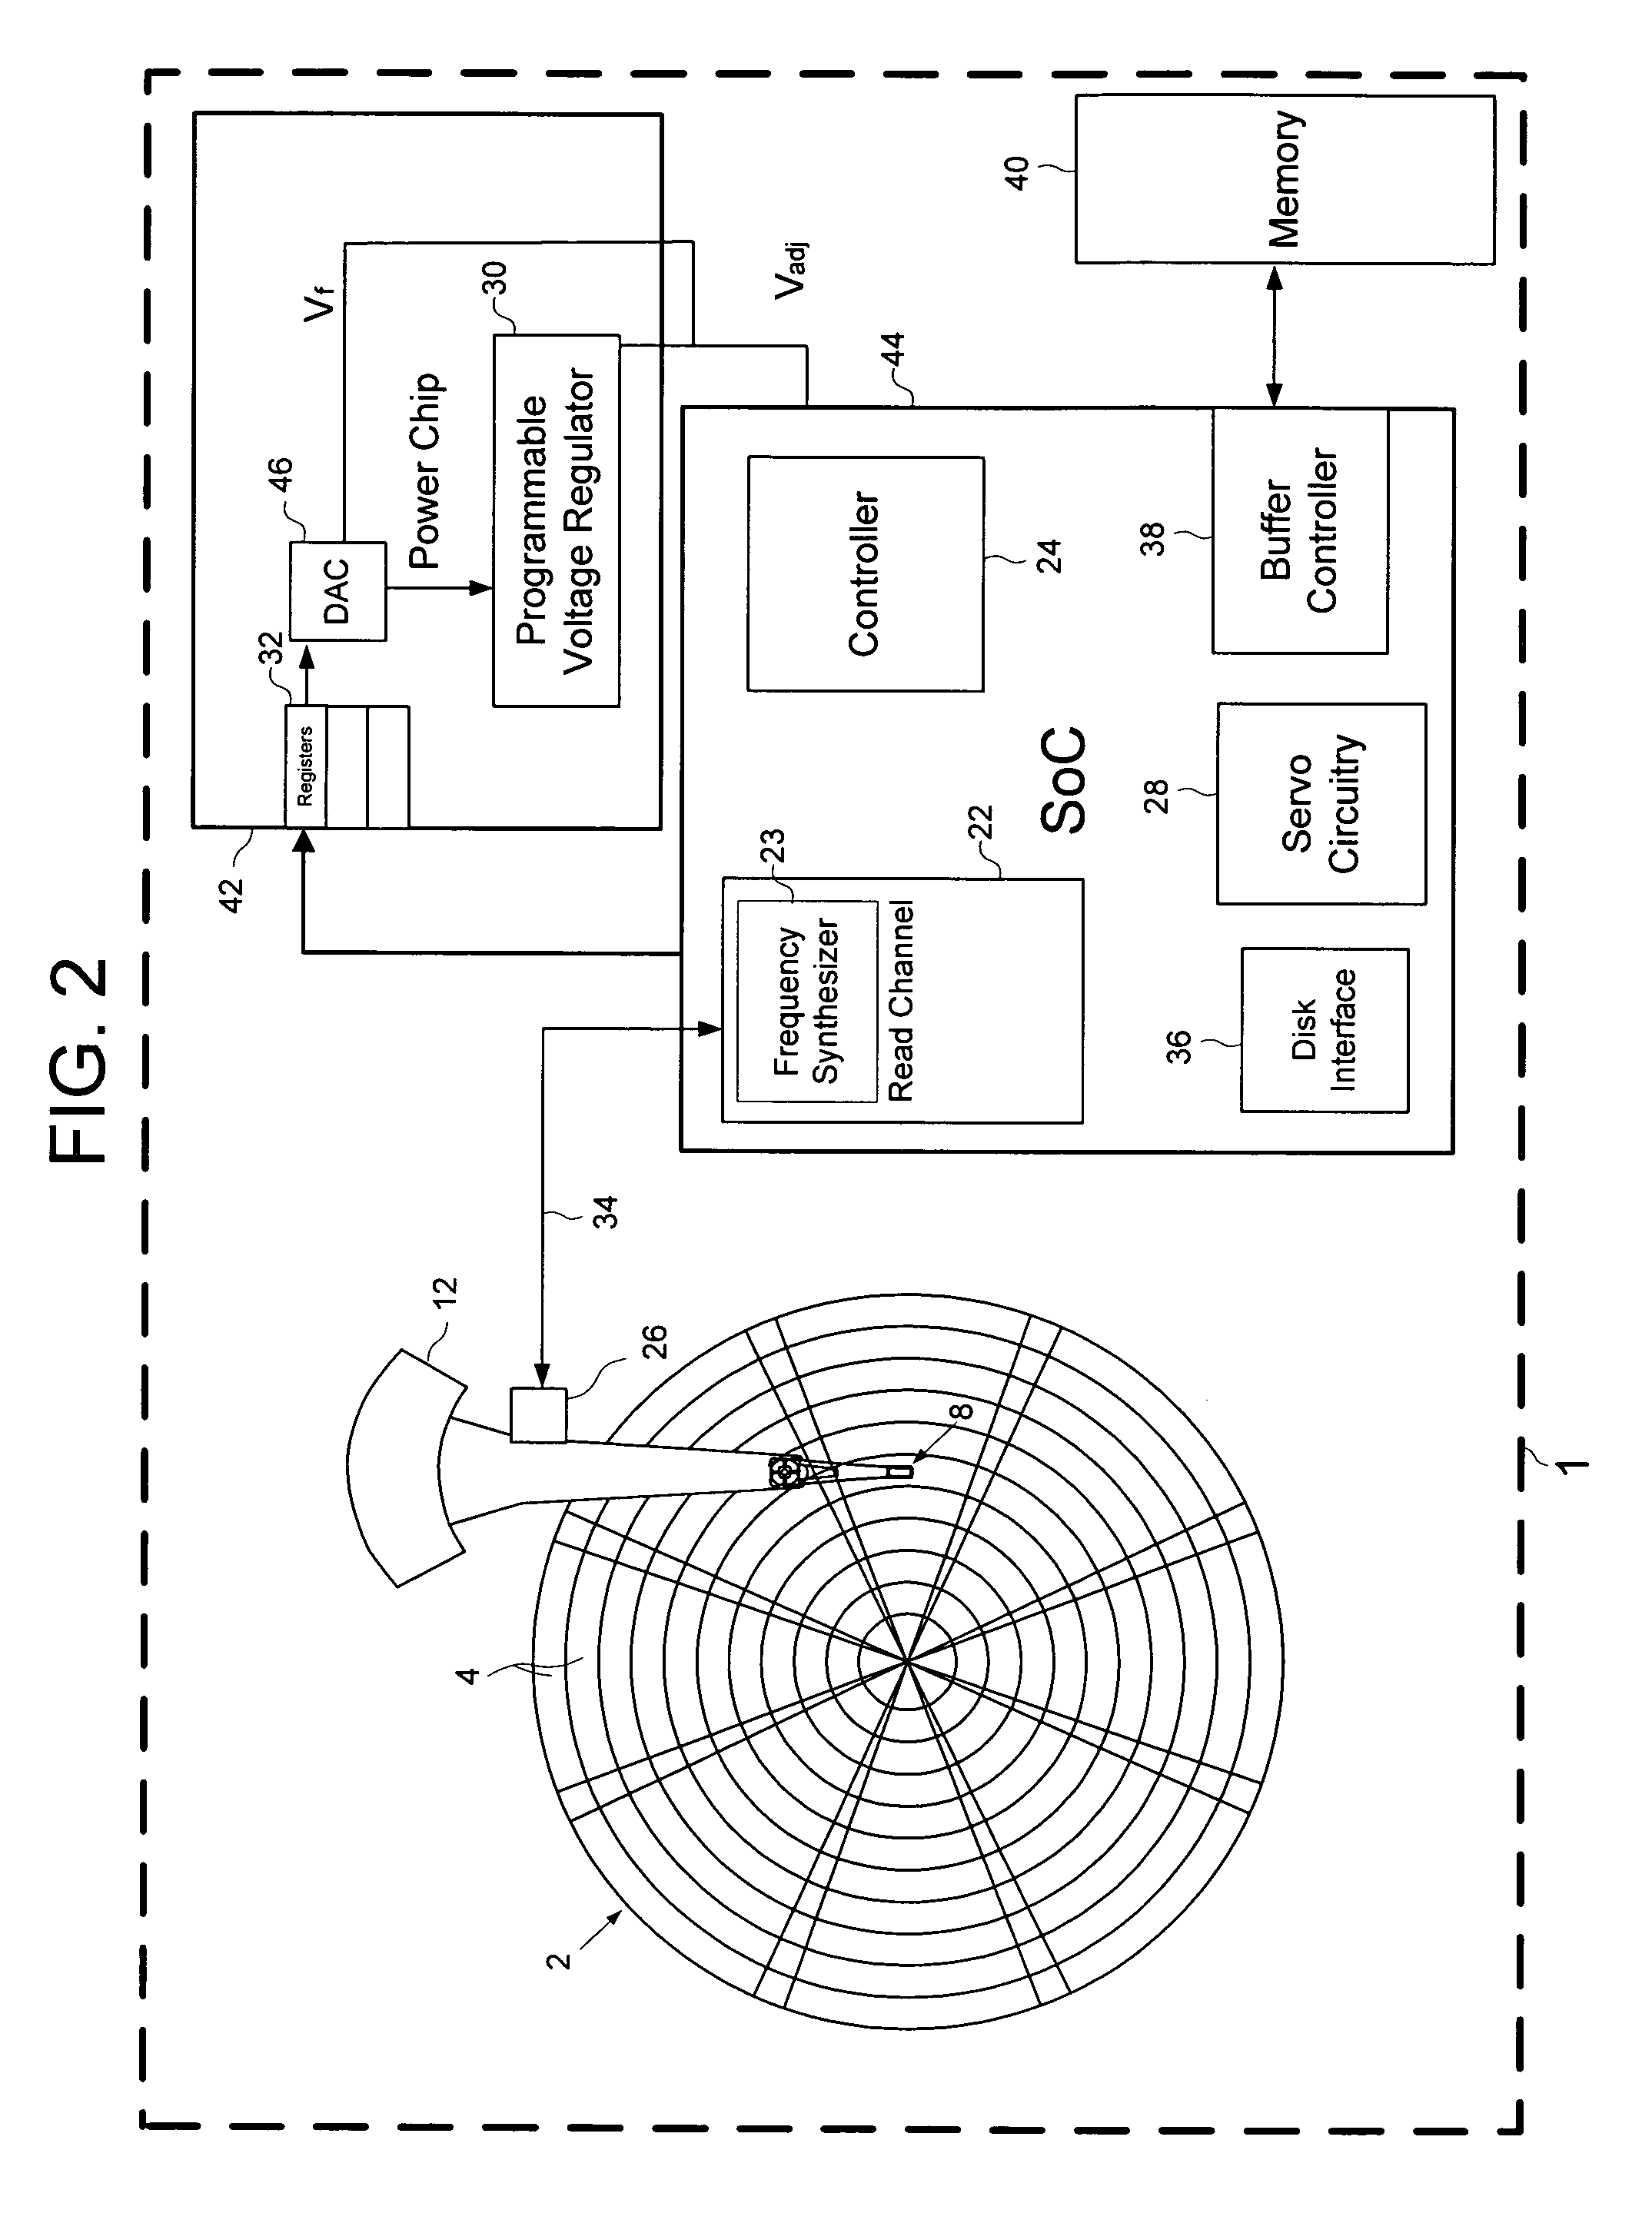 Adjusting voltage delivered to disk drive circuitry based on a selected zone